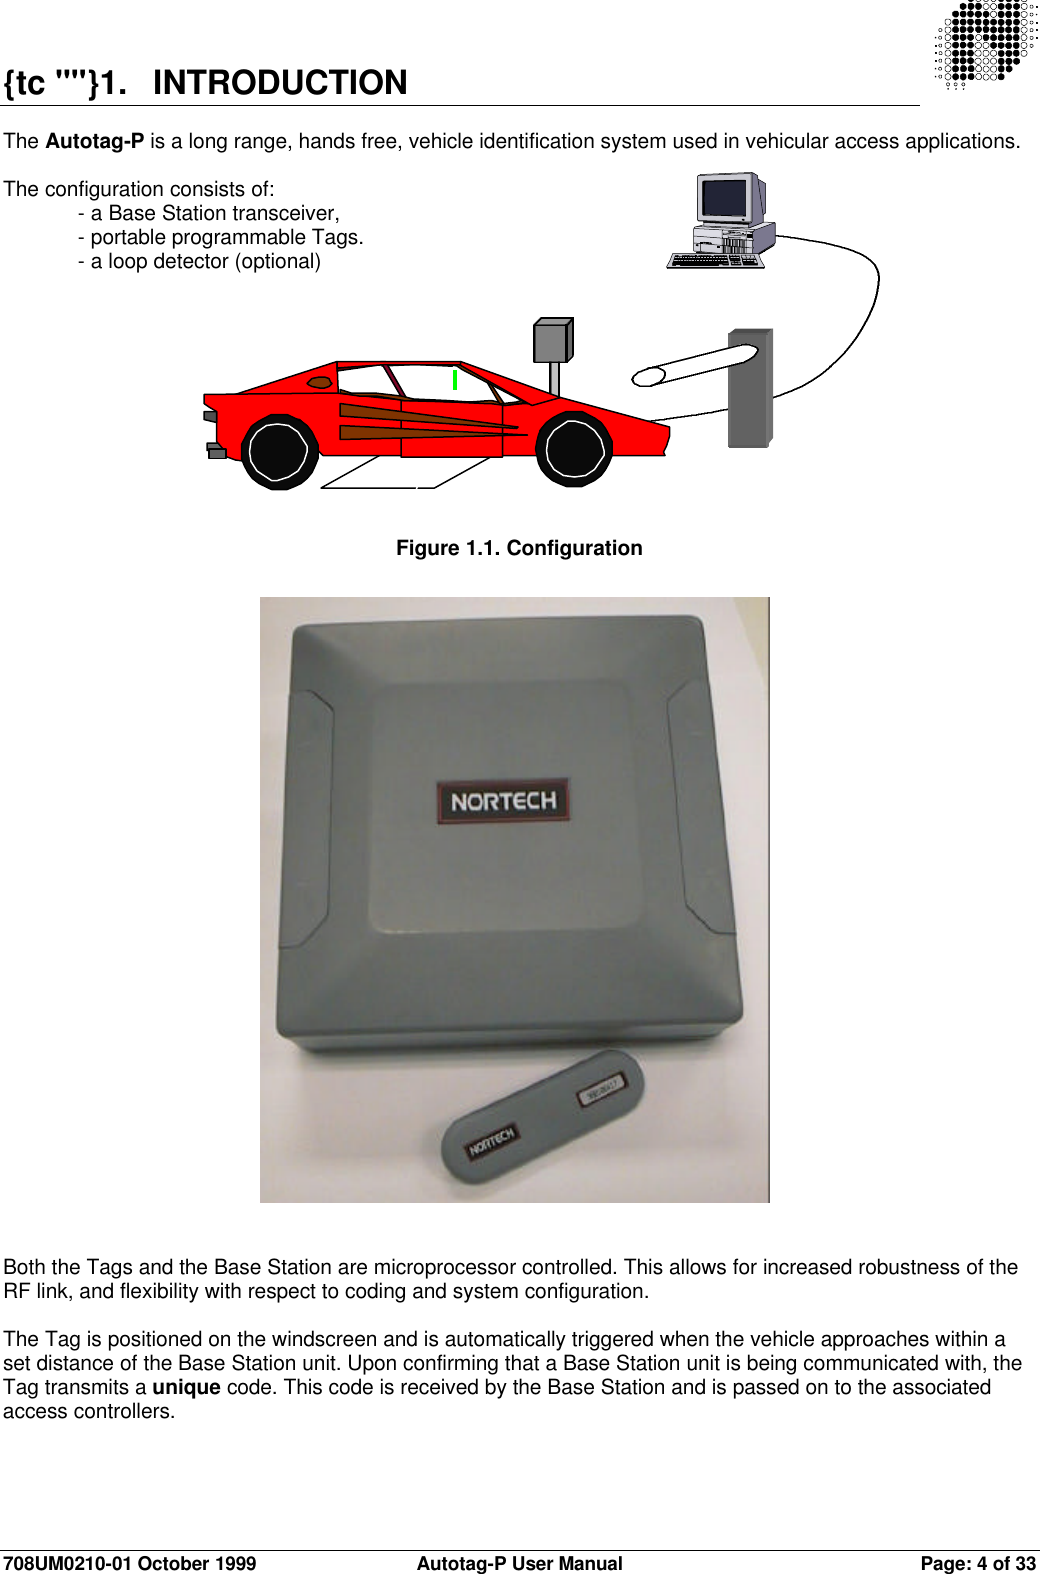 708UM0210-01 October 1999 Autotag-P User Manual Page: 4 of 33{tc &quot;&quot;}1. INTRODUCTIONThe Autotag-P is a long range, hands free, vehicle identification system used in vehicular access applications.The configuration consists of:- a Base Station transceiver,- portable programmable Tags.- a loop detector (optional)Figure 1.1. ConfigurationBoth the Tags and the Base Station are microprocessor controlled. This allows for increased robustness of theRF link, and flexibility with respect to coding and system configuration.The Tag is positioned on the windscreen and is automatically triggered when the vehicle approaches within aset distance of the Base Station unit. Upon confirming that a Base Station unit is being communicated with, theTag transmits a unique code. This code is received by the Base Station and is passed on to the associatedaccess controllers.